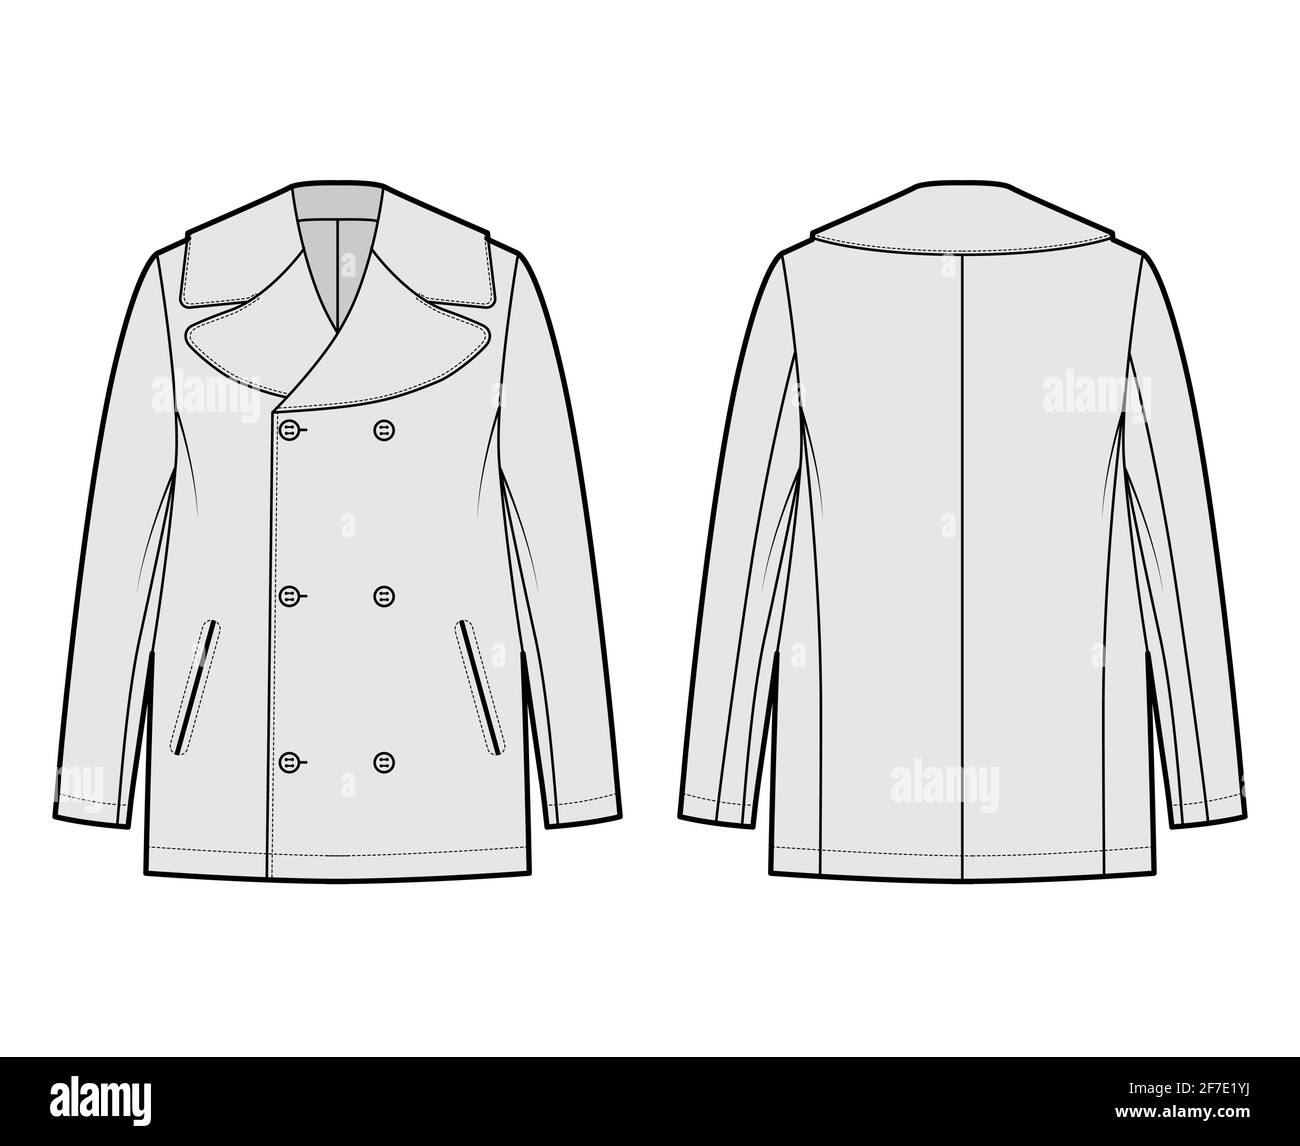 Pea overcoat technical fashion illustration with fingertip length, oversized Stand up collar, jetted pockets. Flat jacket template front, back, grey color style. Women, men, unisex top CAD mockup Stock Vector